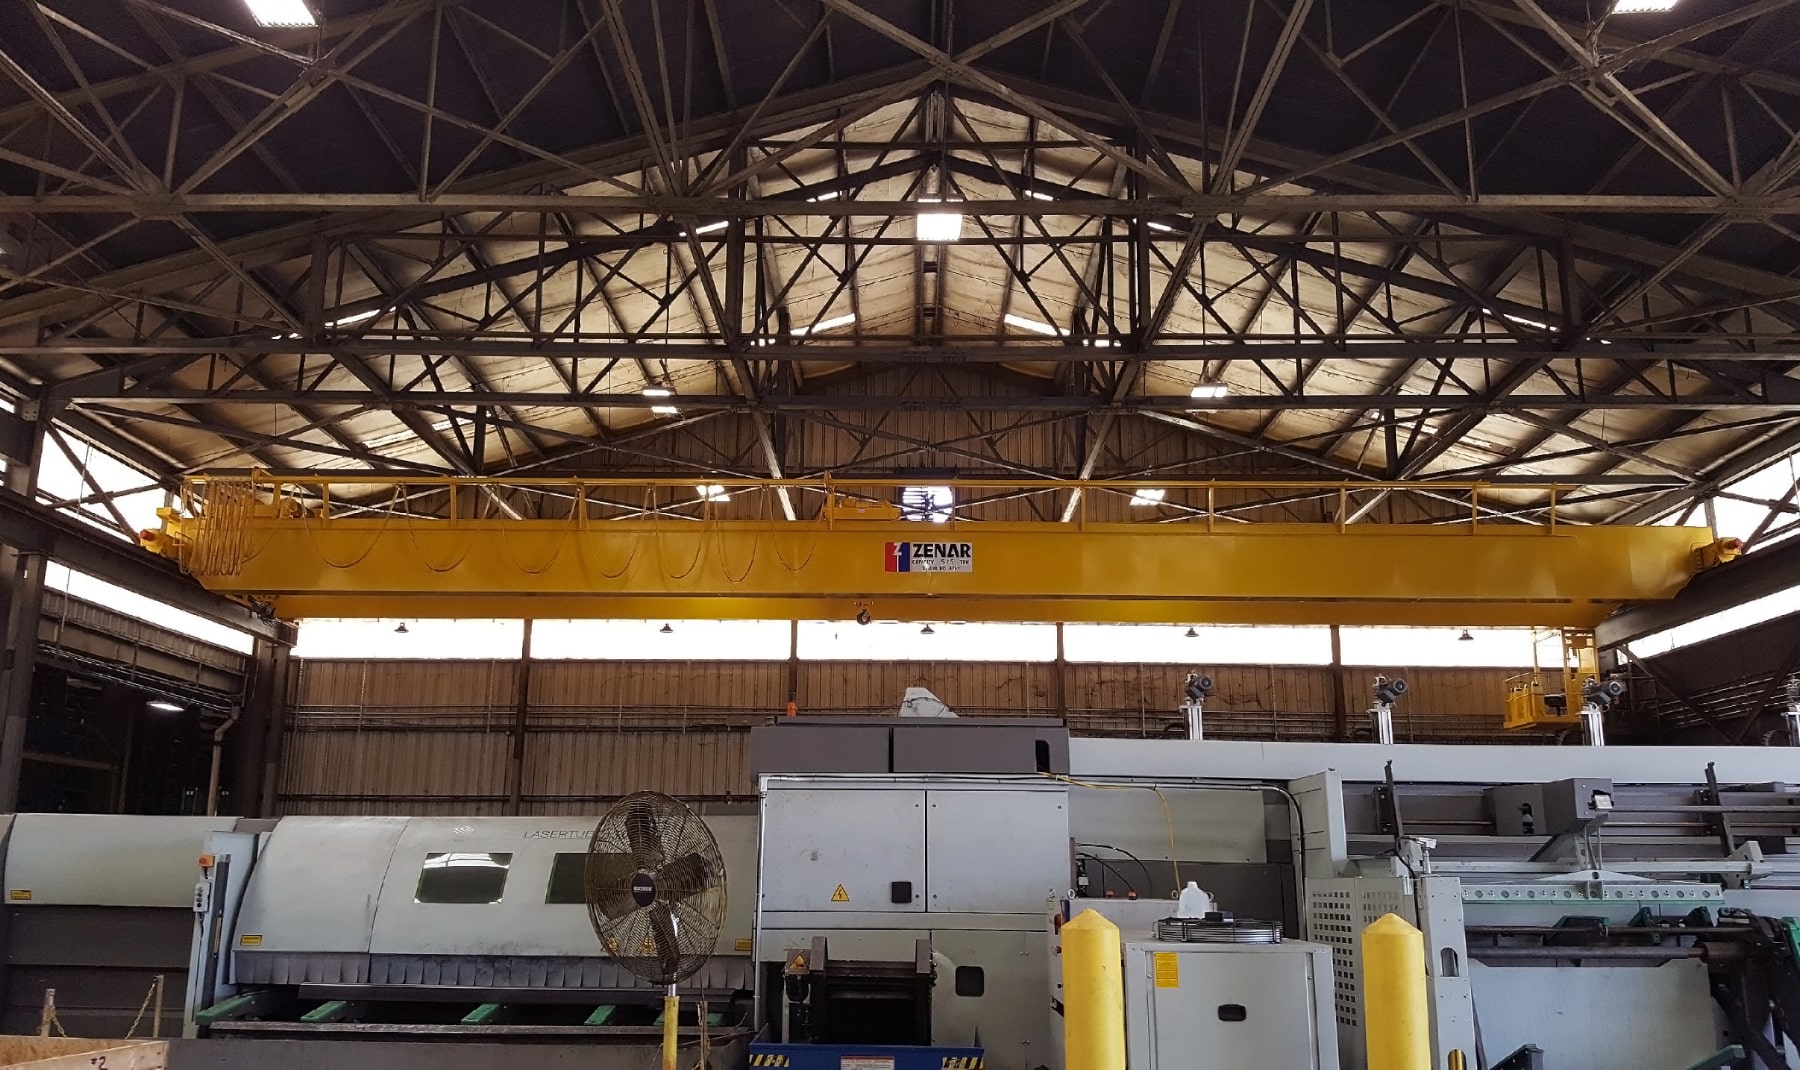 Overhead crane above other parts